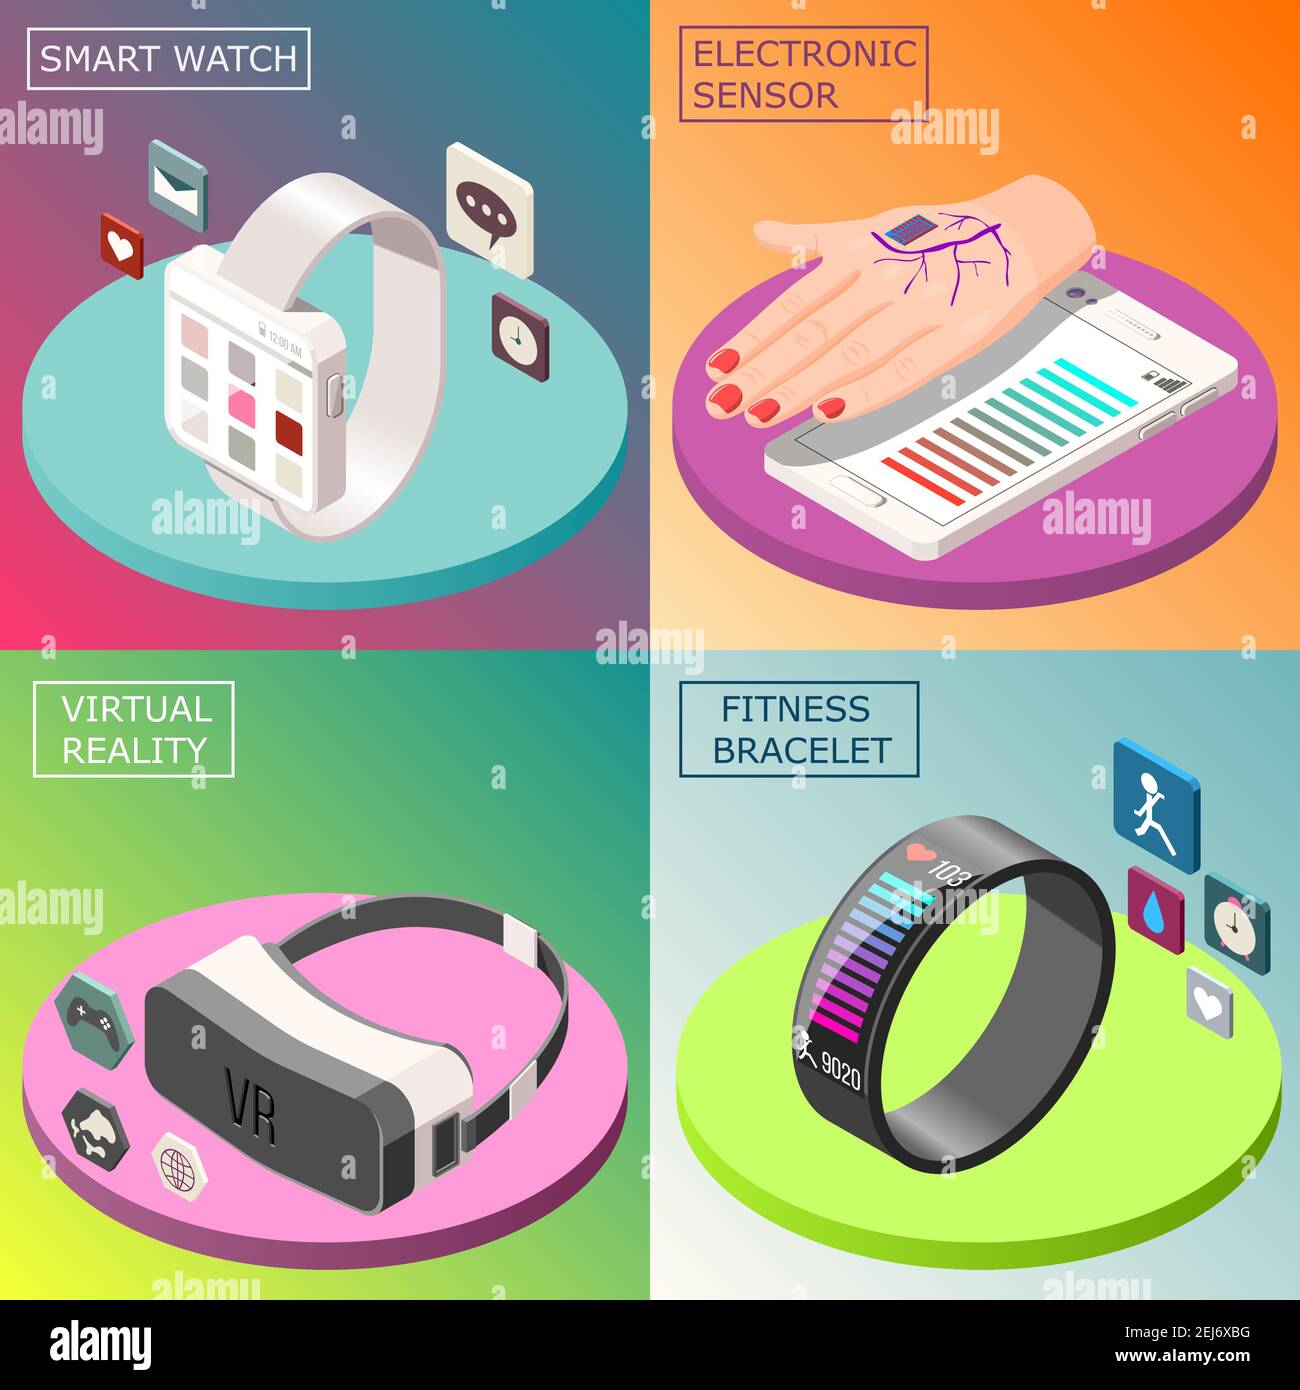 Portable electronics isometric design concept with smartwatch, virtual reality glasses, medical sensor, fitness bracelet isolated vector illustration Stock Vector